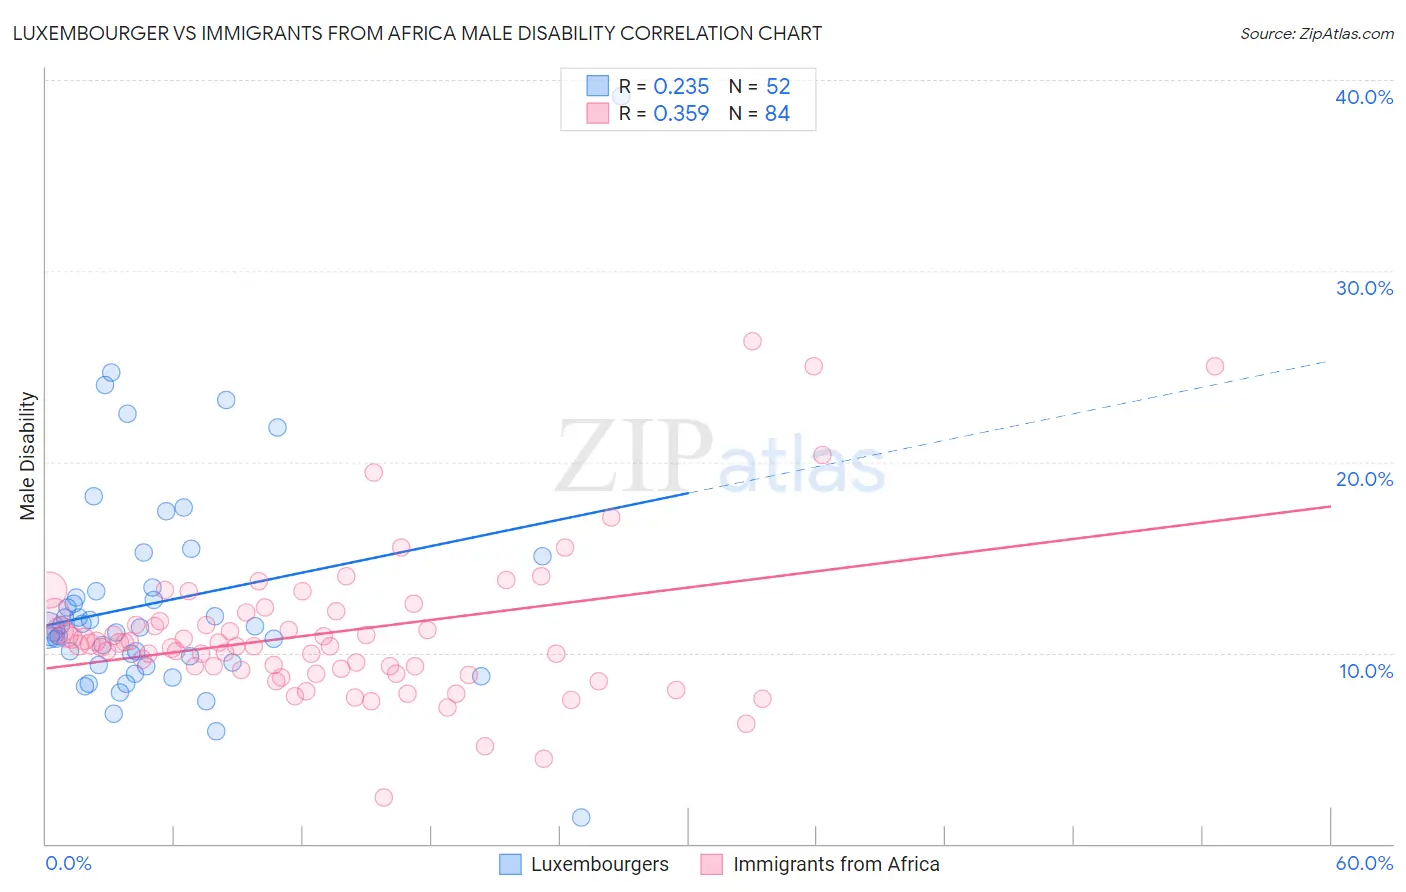 Luxembourger vs Immigrants from Africa Male Disability